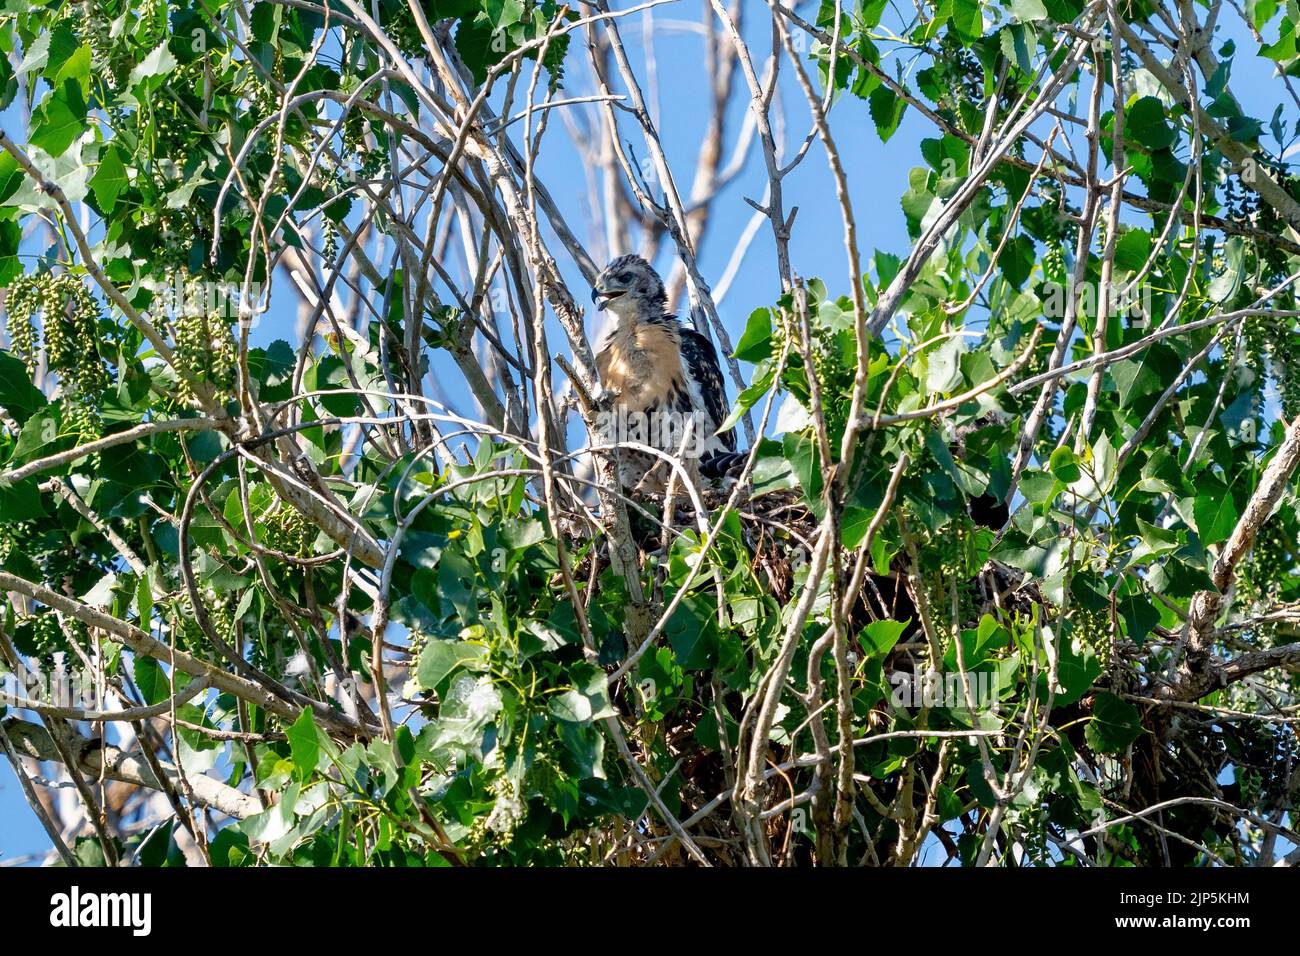 A young Red-Tailed Hawk standing in its nest, with new golden chest feathers coming in, replacing its baby downy fur. Stock Photo